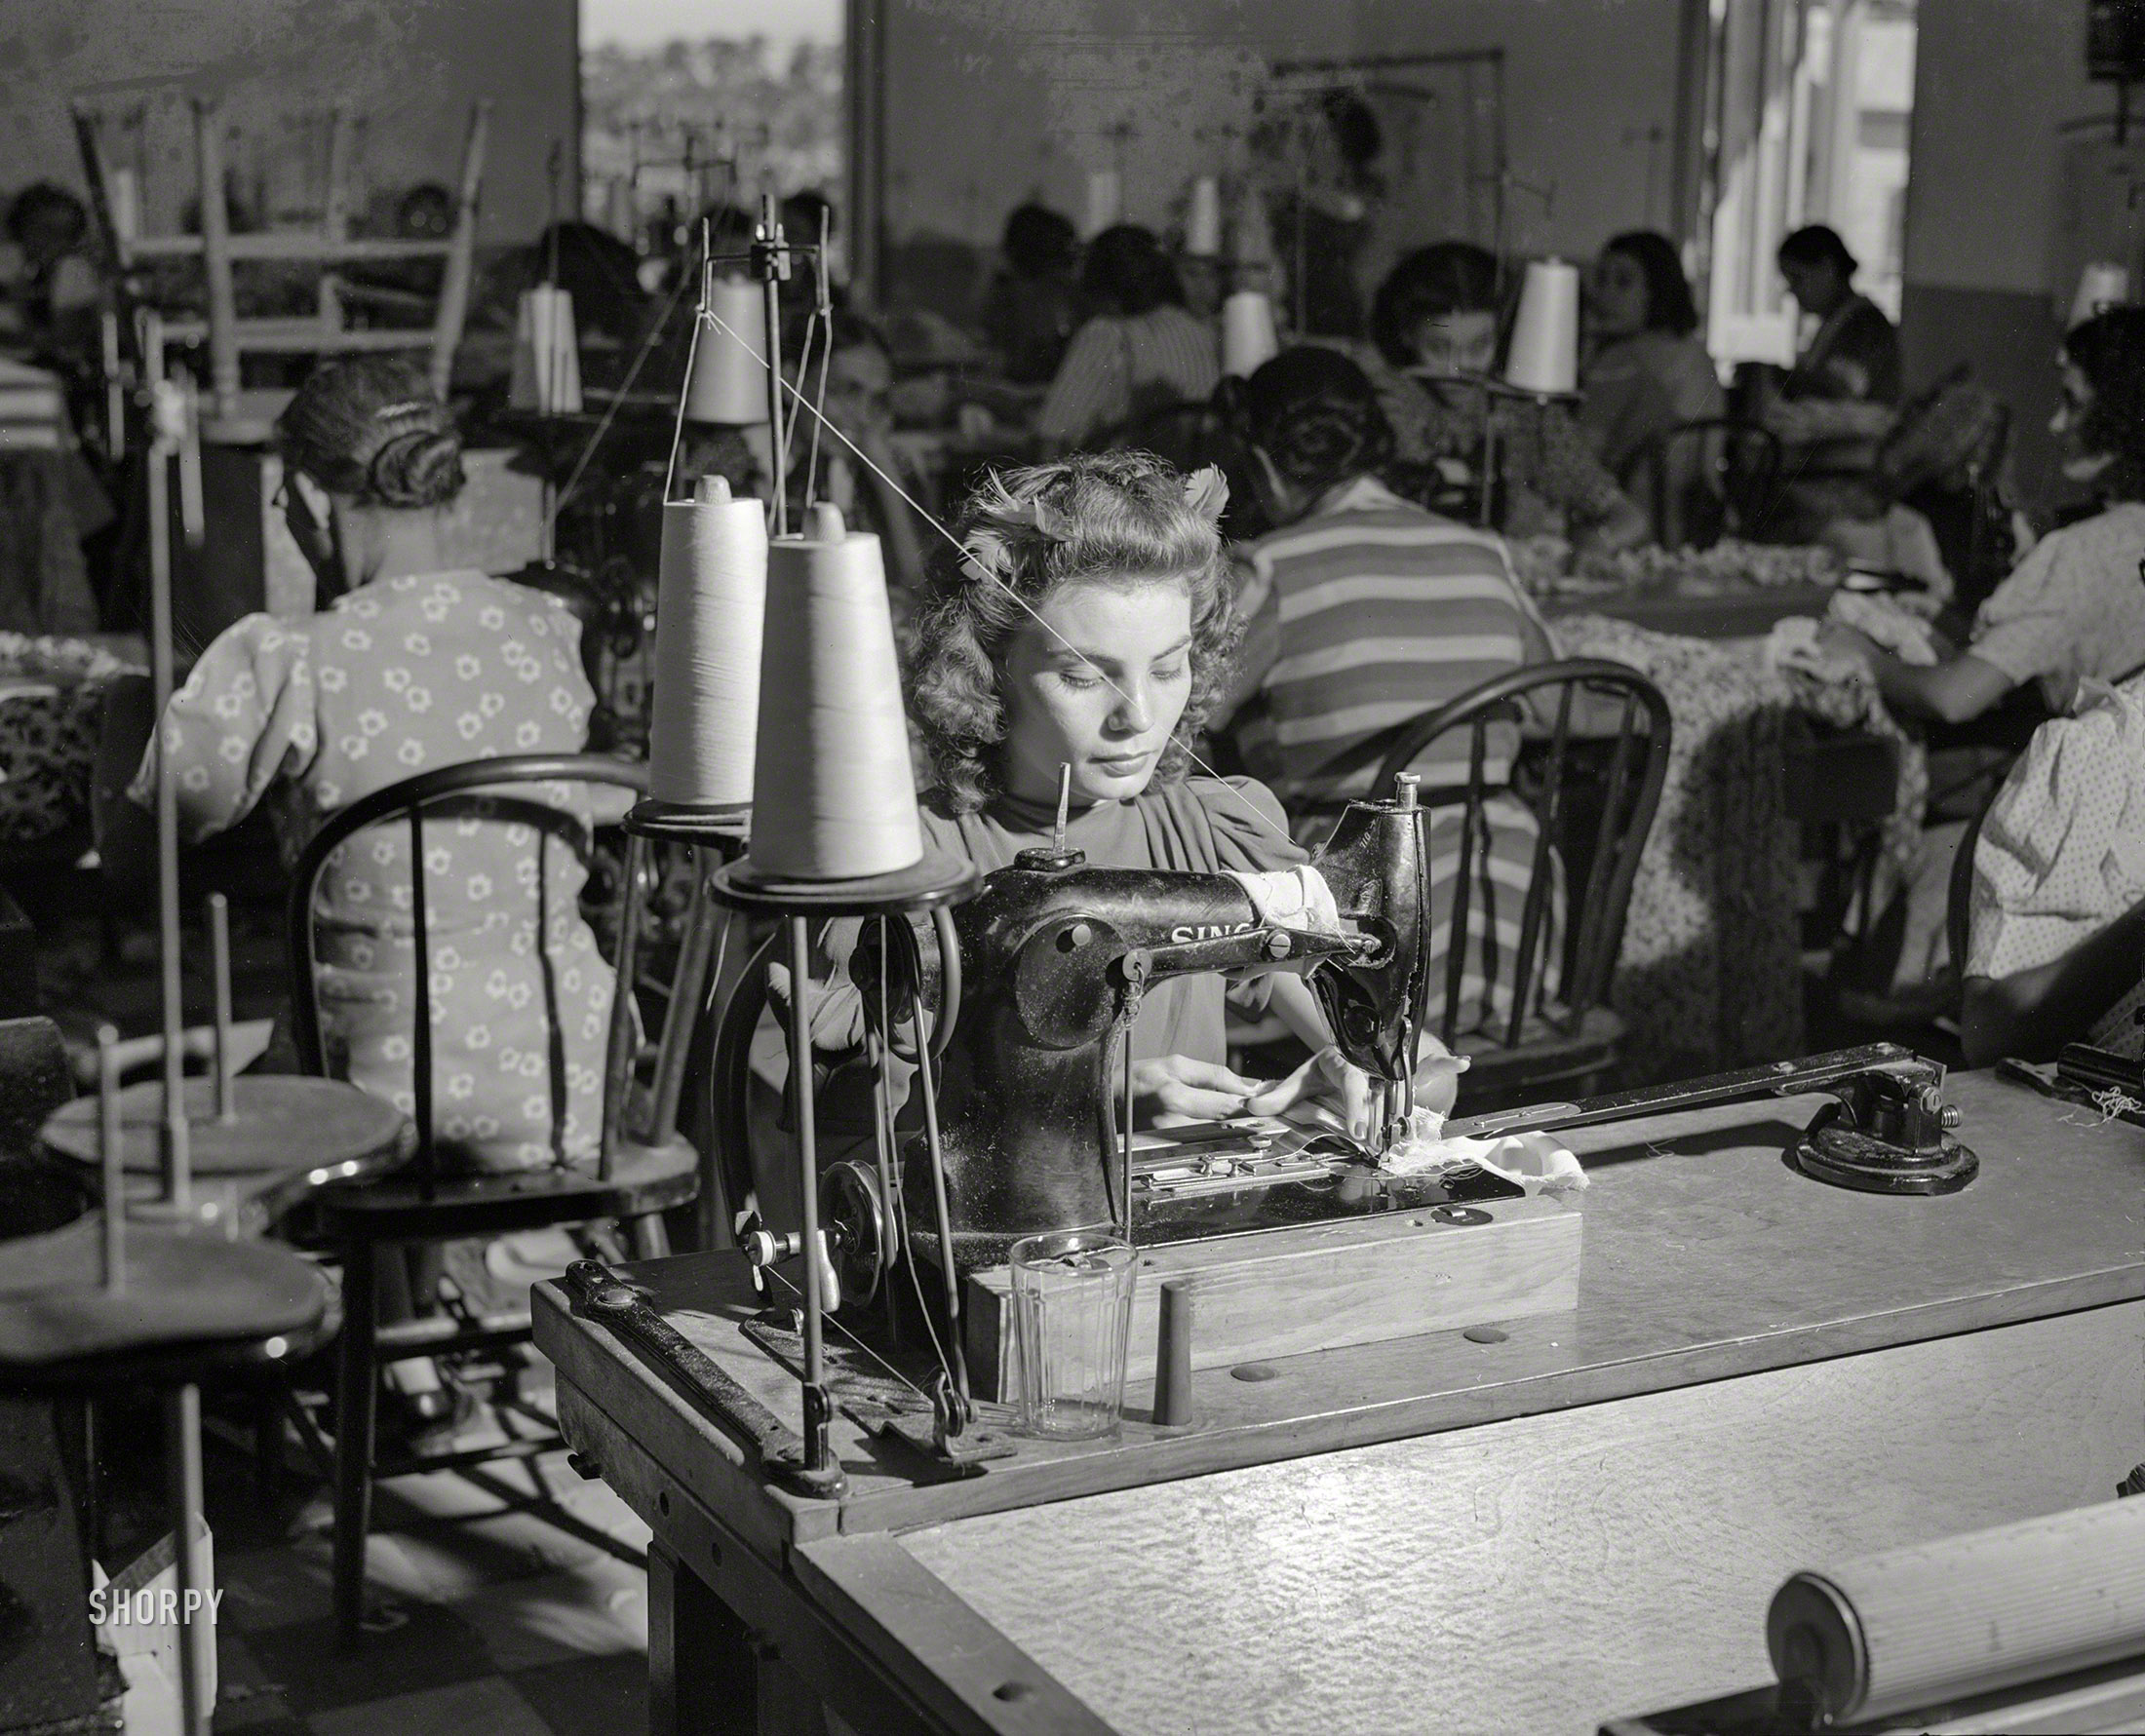 December 1941. "San Juan, Puerto Rico. In a dress factory." Medium format negative by Jack Delano for the Farm Security Administration. View full size.